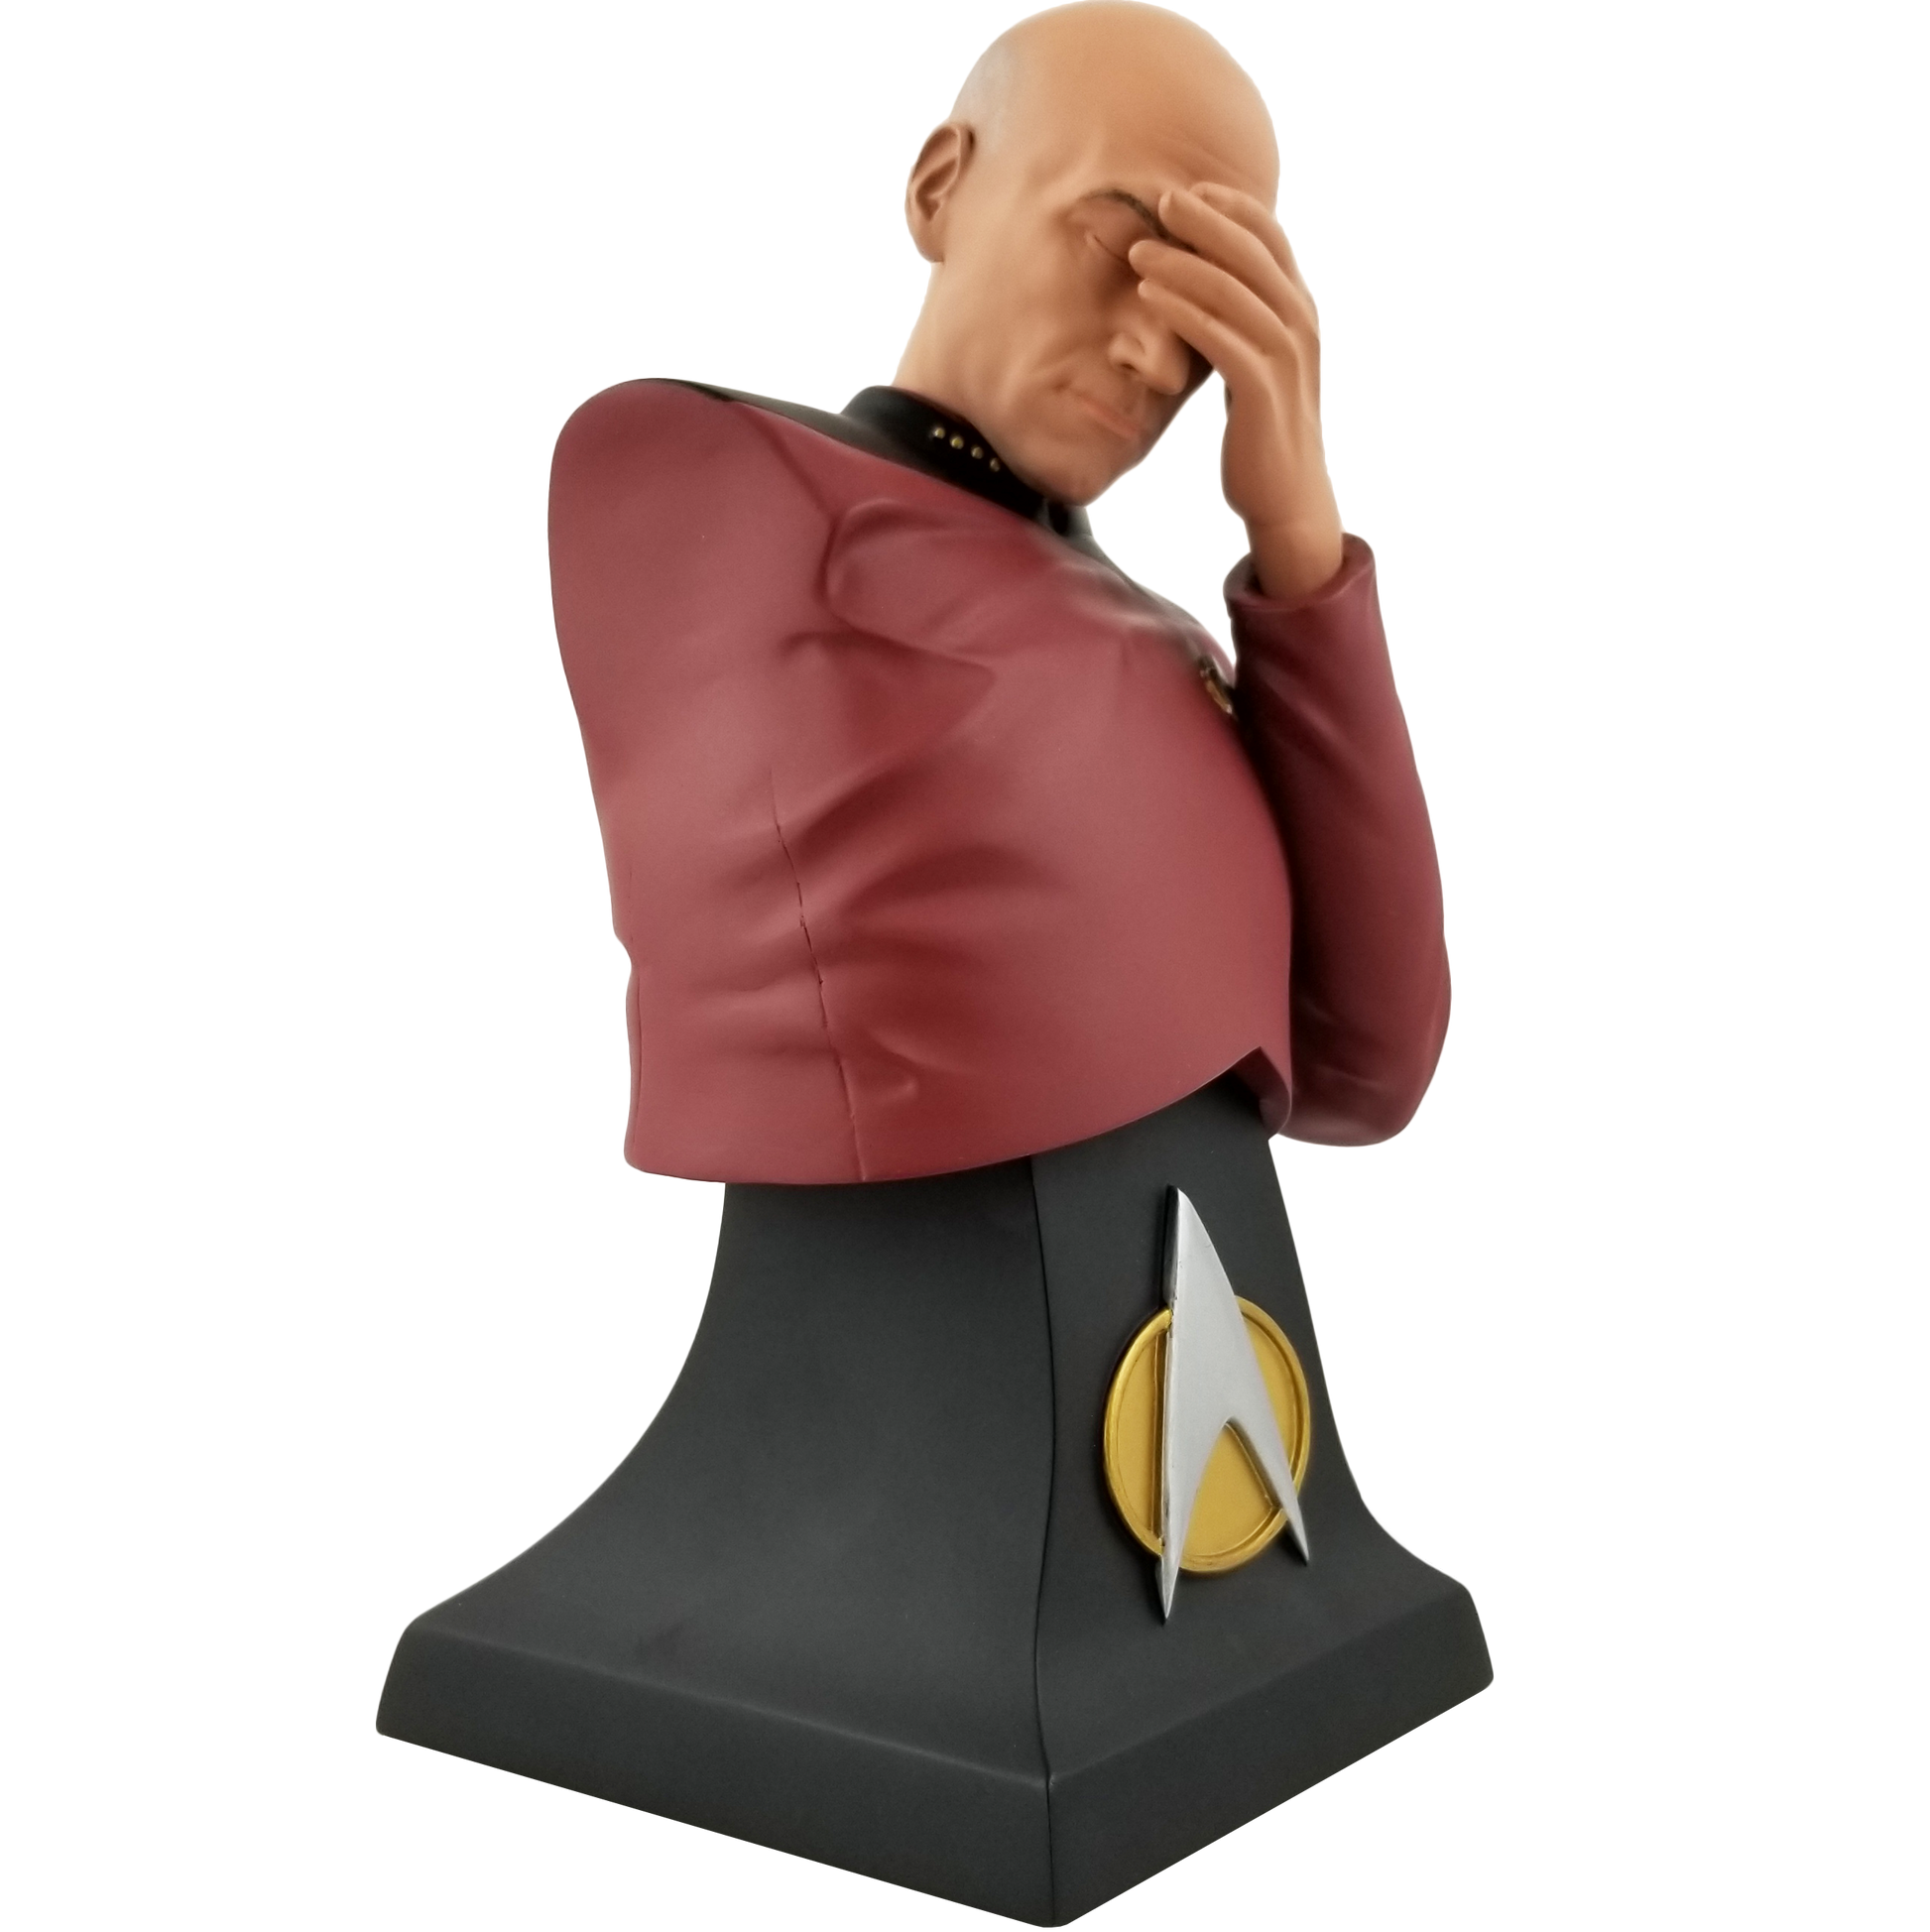 Star Trek The Next Generation Captain Picard Facepalm Bust Paperweight - Previews SDCC Exclusive - Icon Heroes 